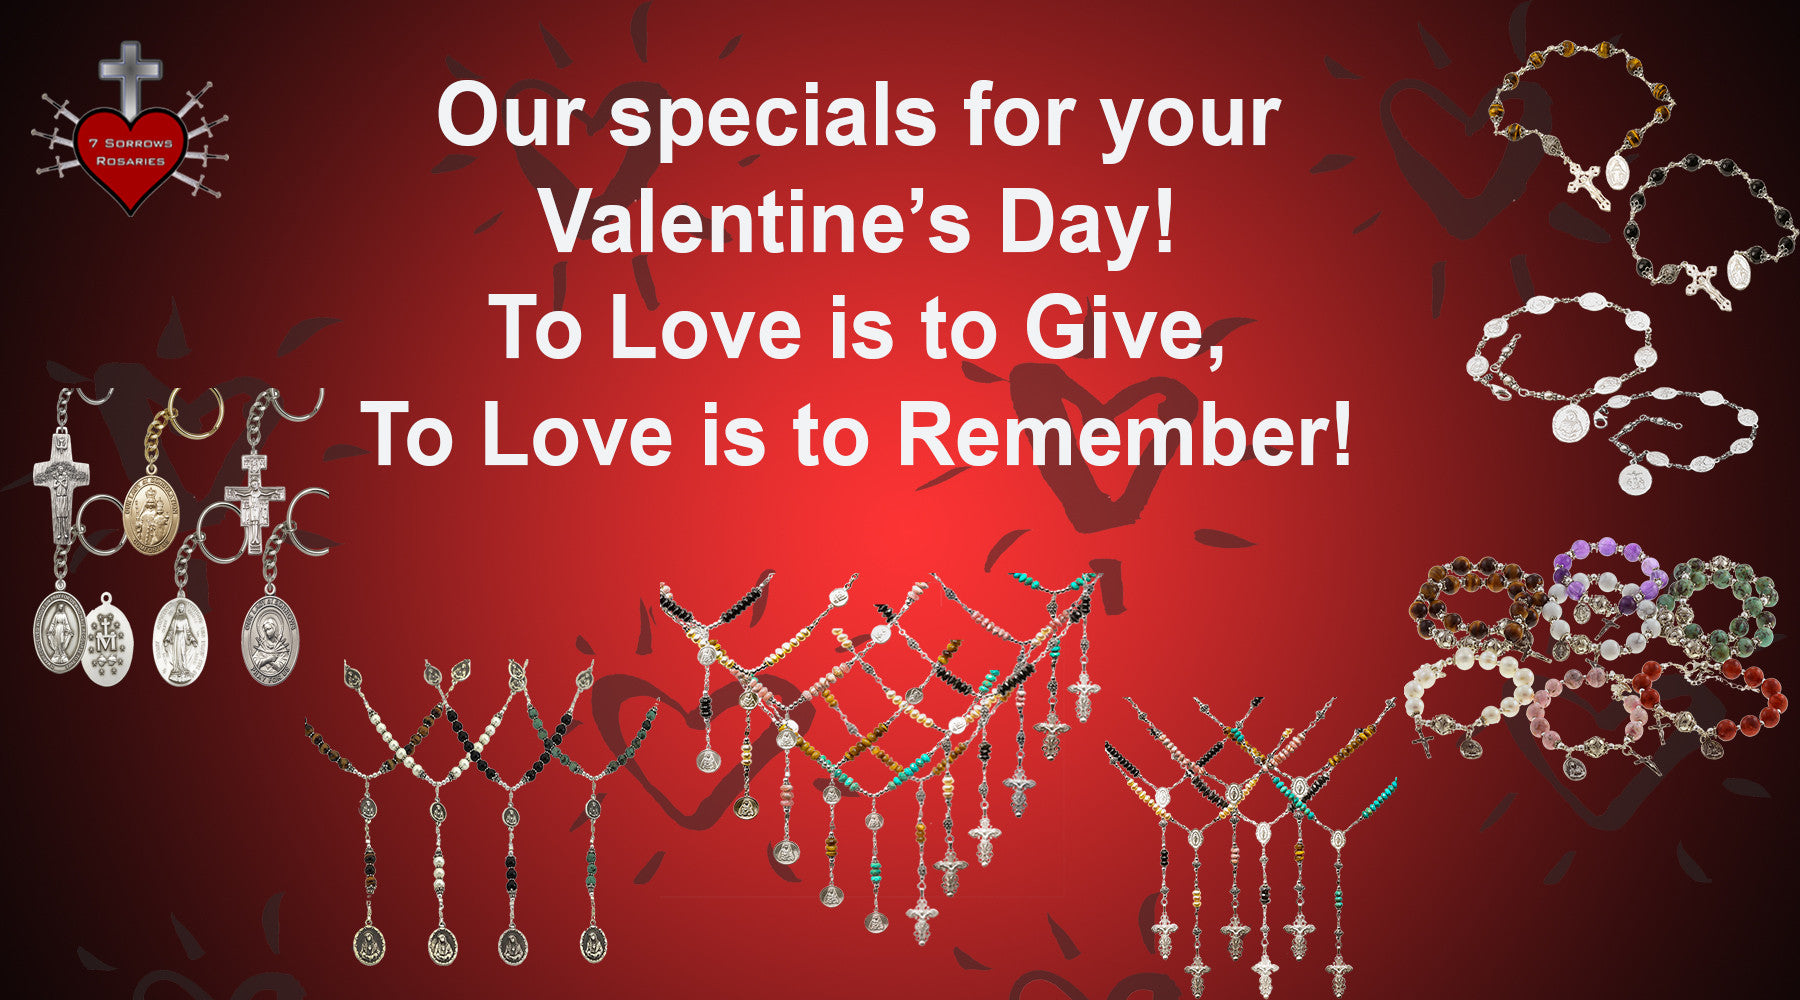 Start Getting Ready for Valentine's Day! Free Shipping in the USA for orders over $50